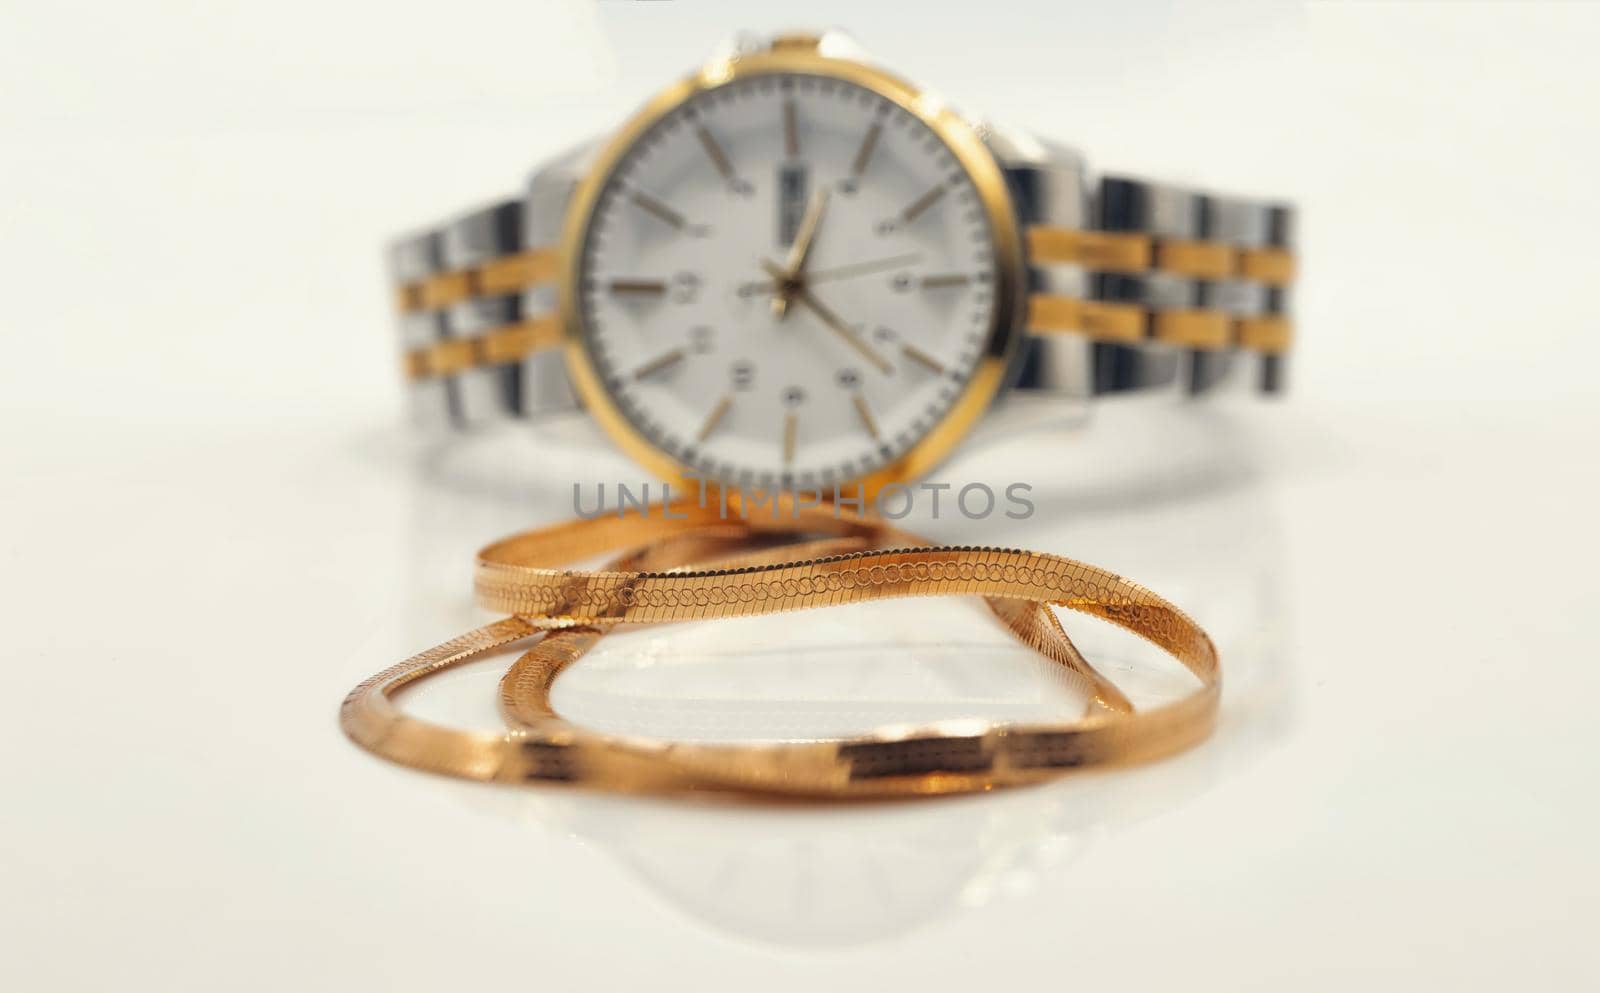 Elegant women's watch and gold chain with snakeskin weave lie on a white reflective surface